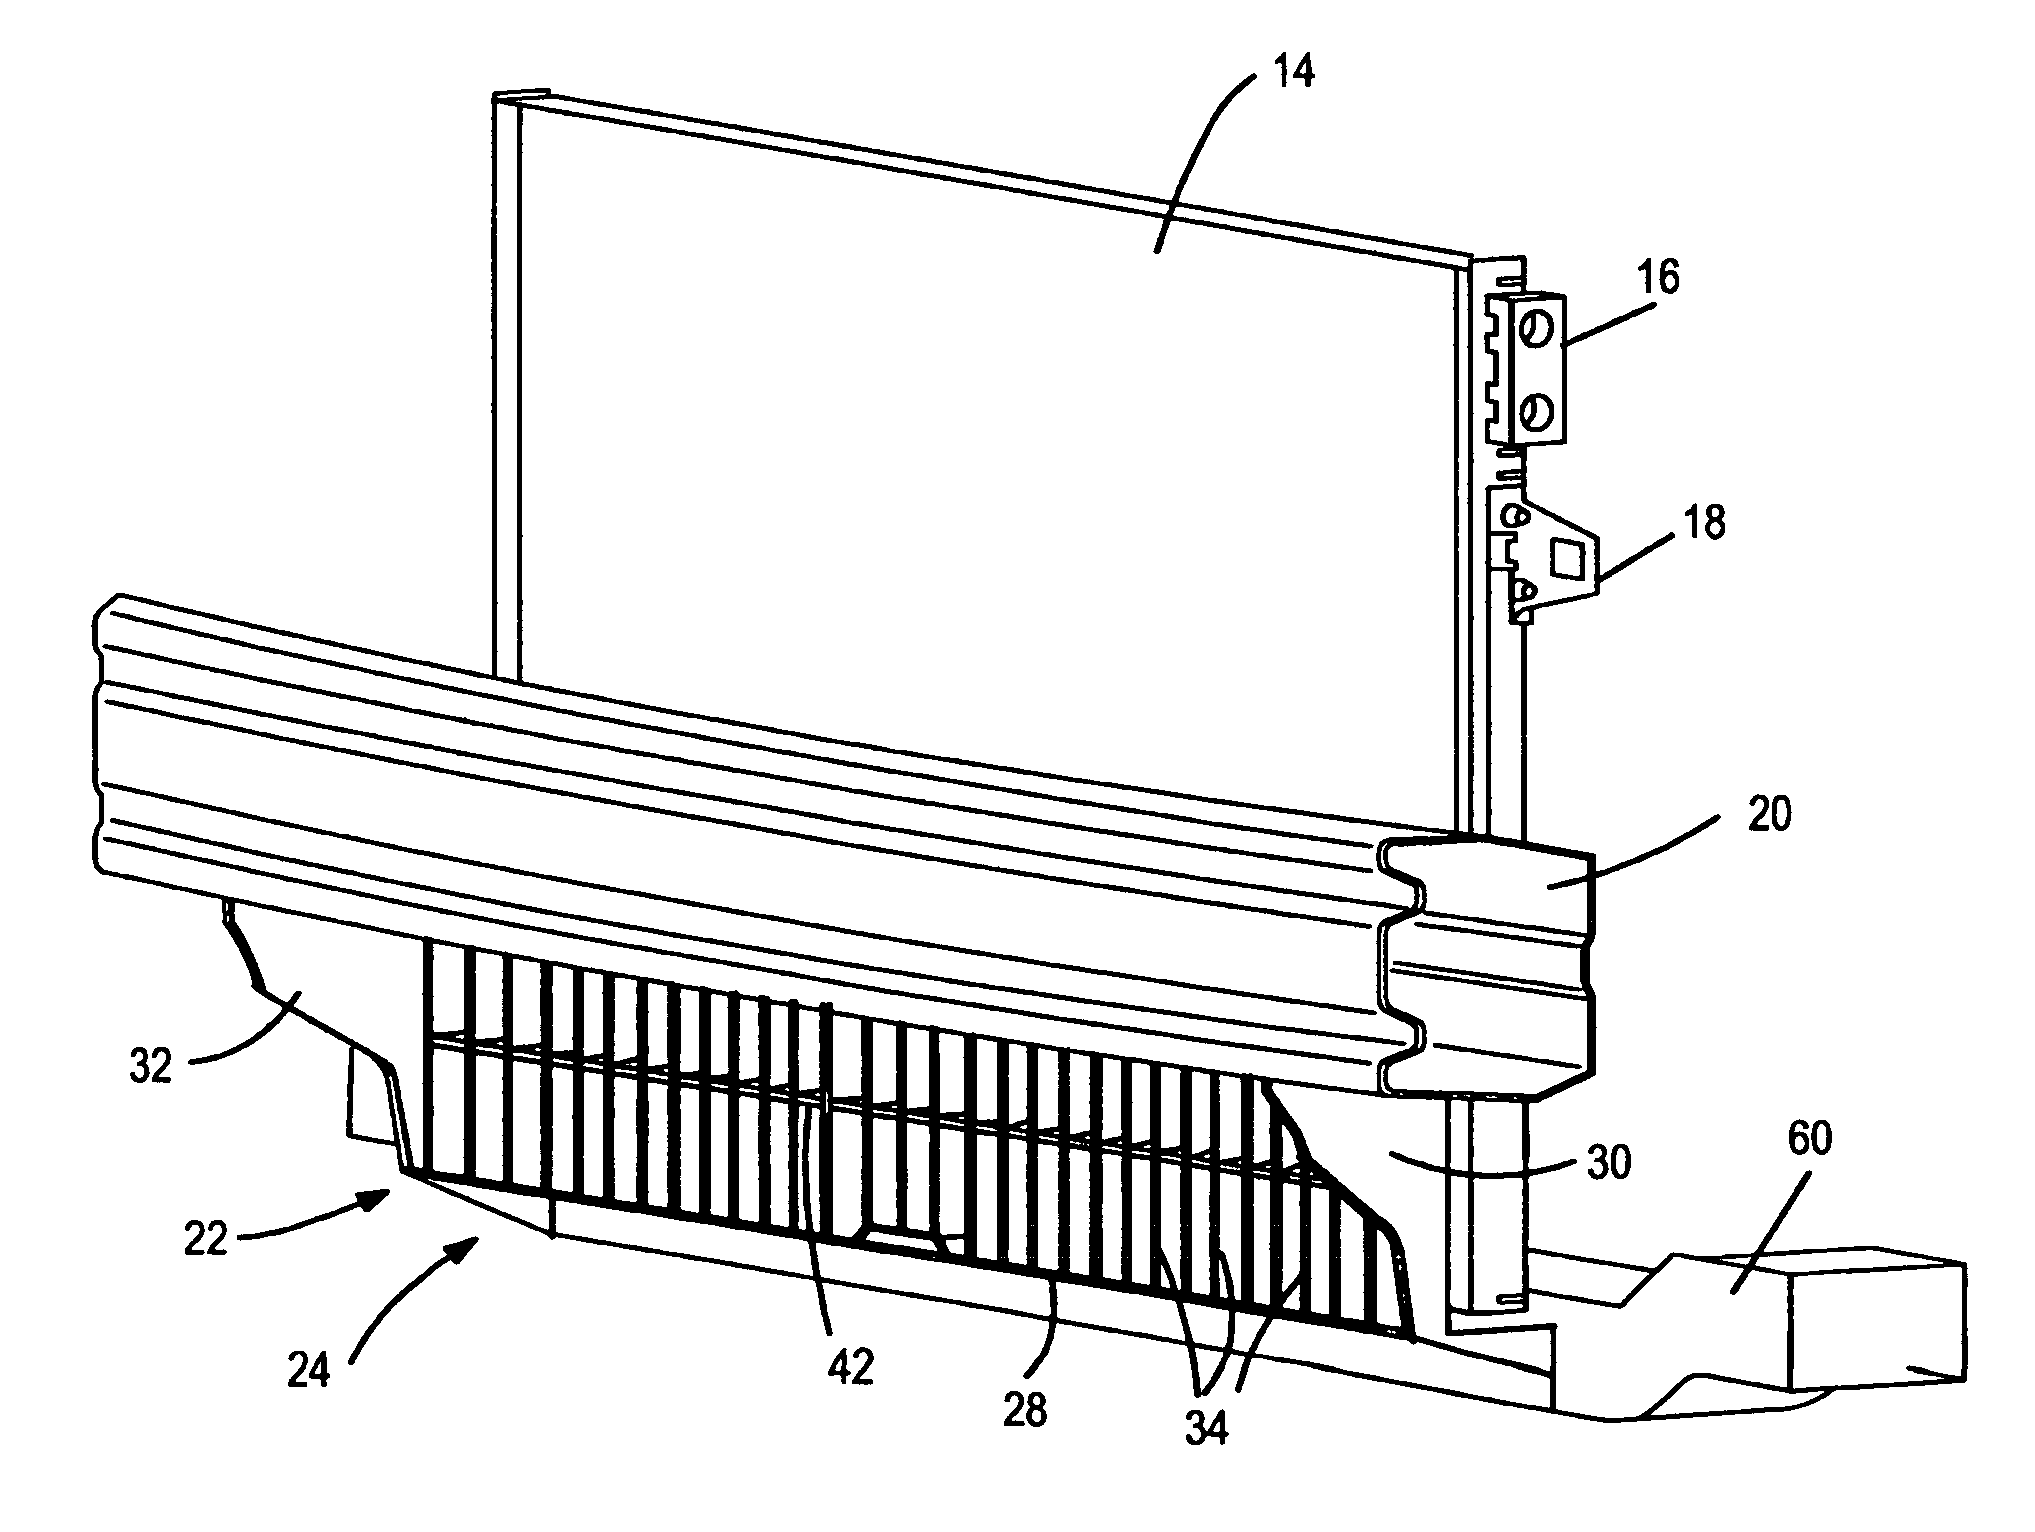 A/C condenser damage protection device